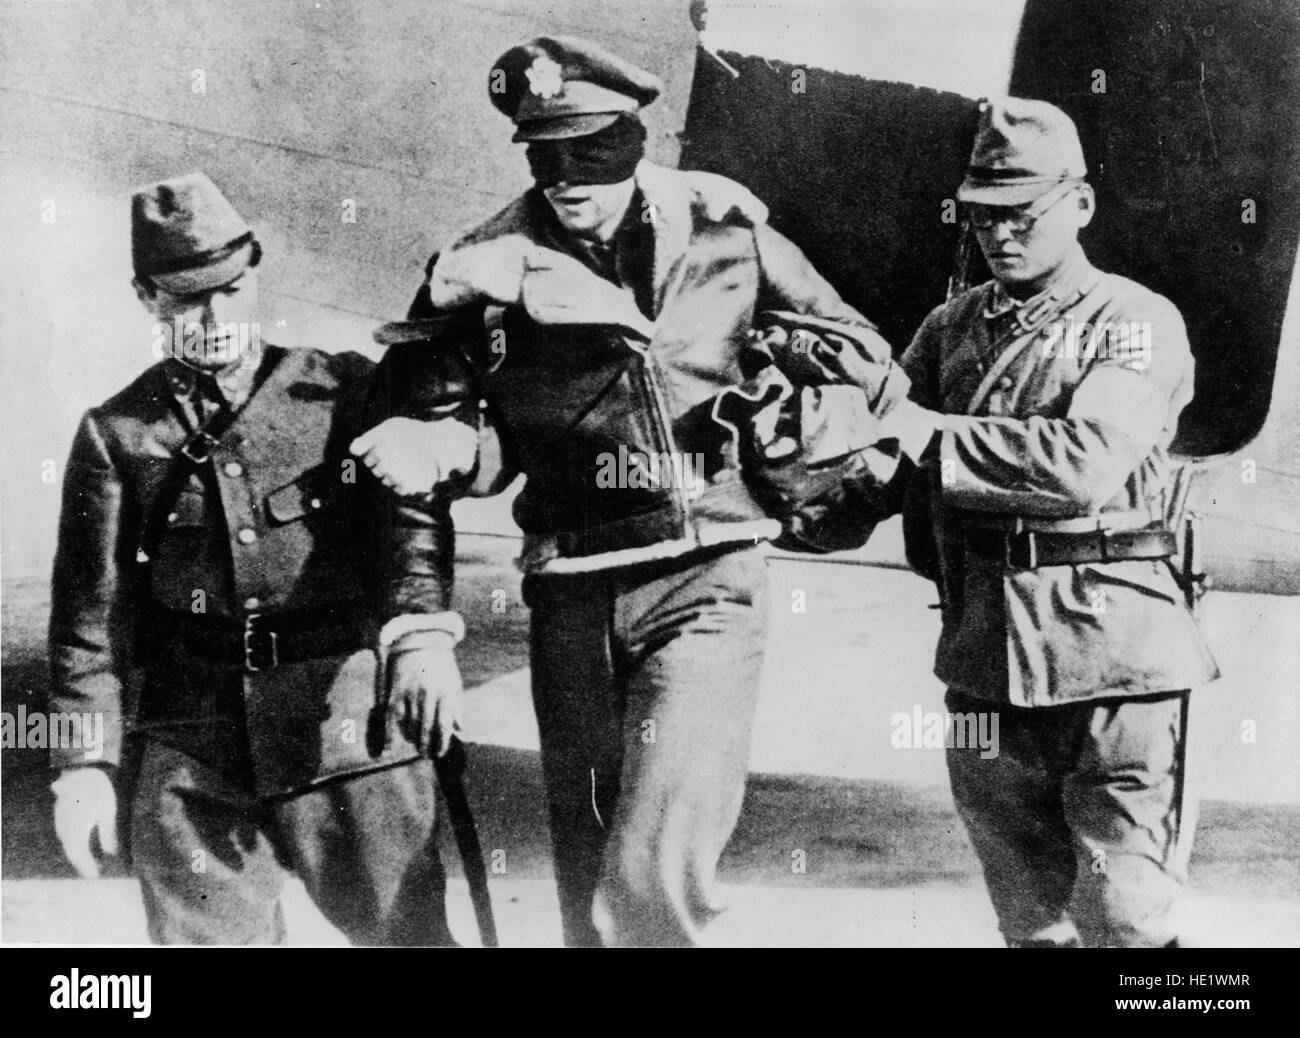 In a photograph found after Japan's surrender in 1945, Lt. Robert L. Hite, copilot of crew 16, is led blindfolded from a Japanese transport aircraft after his B-25 crash landed in a China after bombing Nagoya on the the "Doolittle Raid" on Japan and he was captured. He was imprisoned for 40 months, but survived the war. Stock Photo